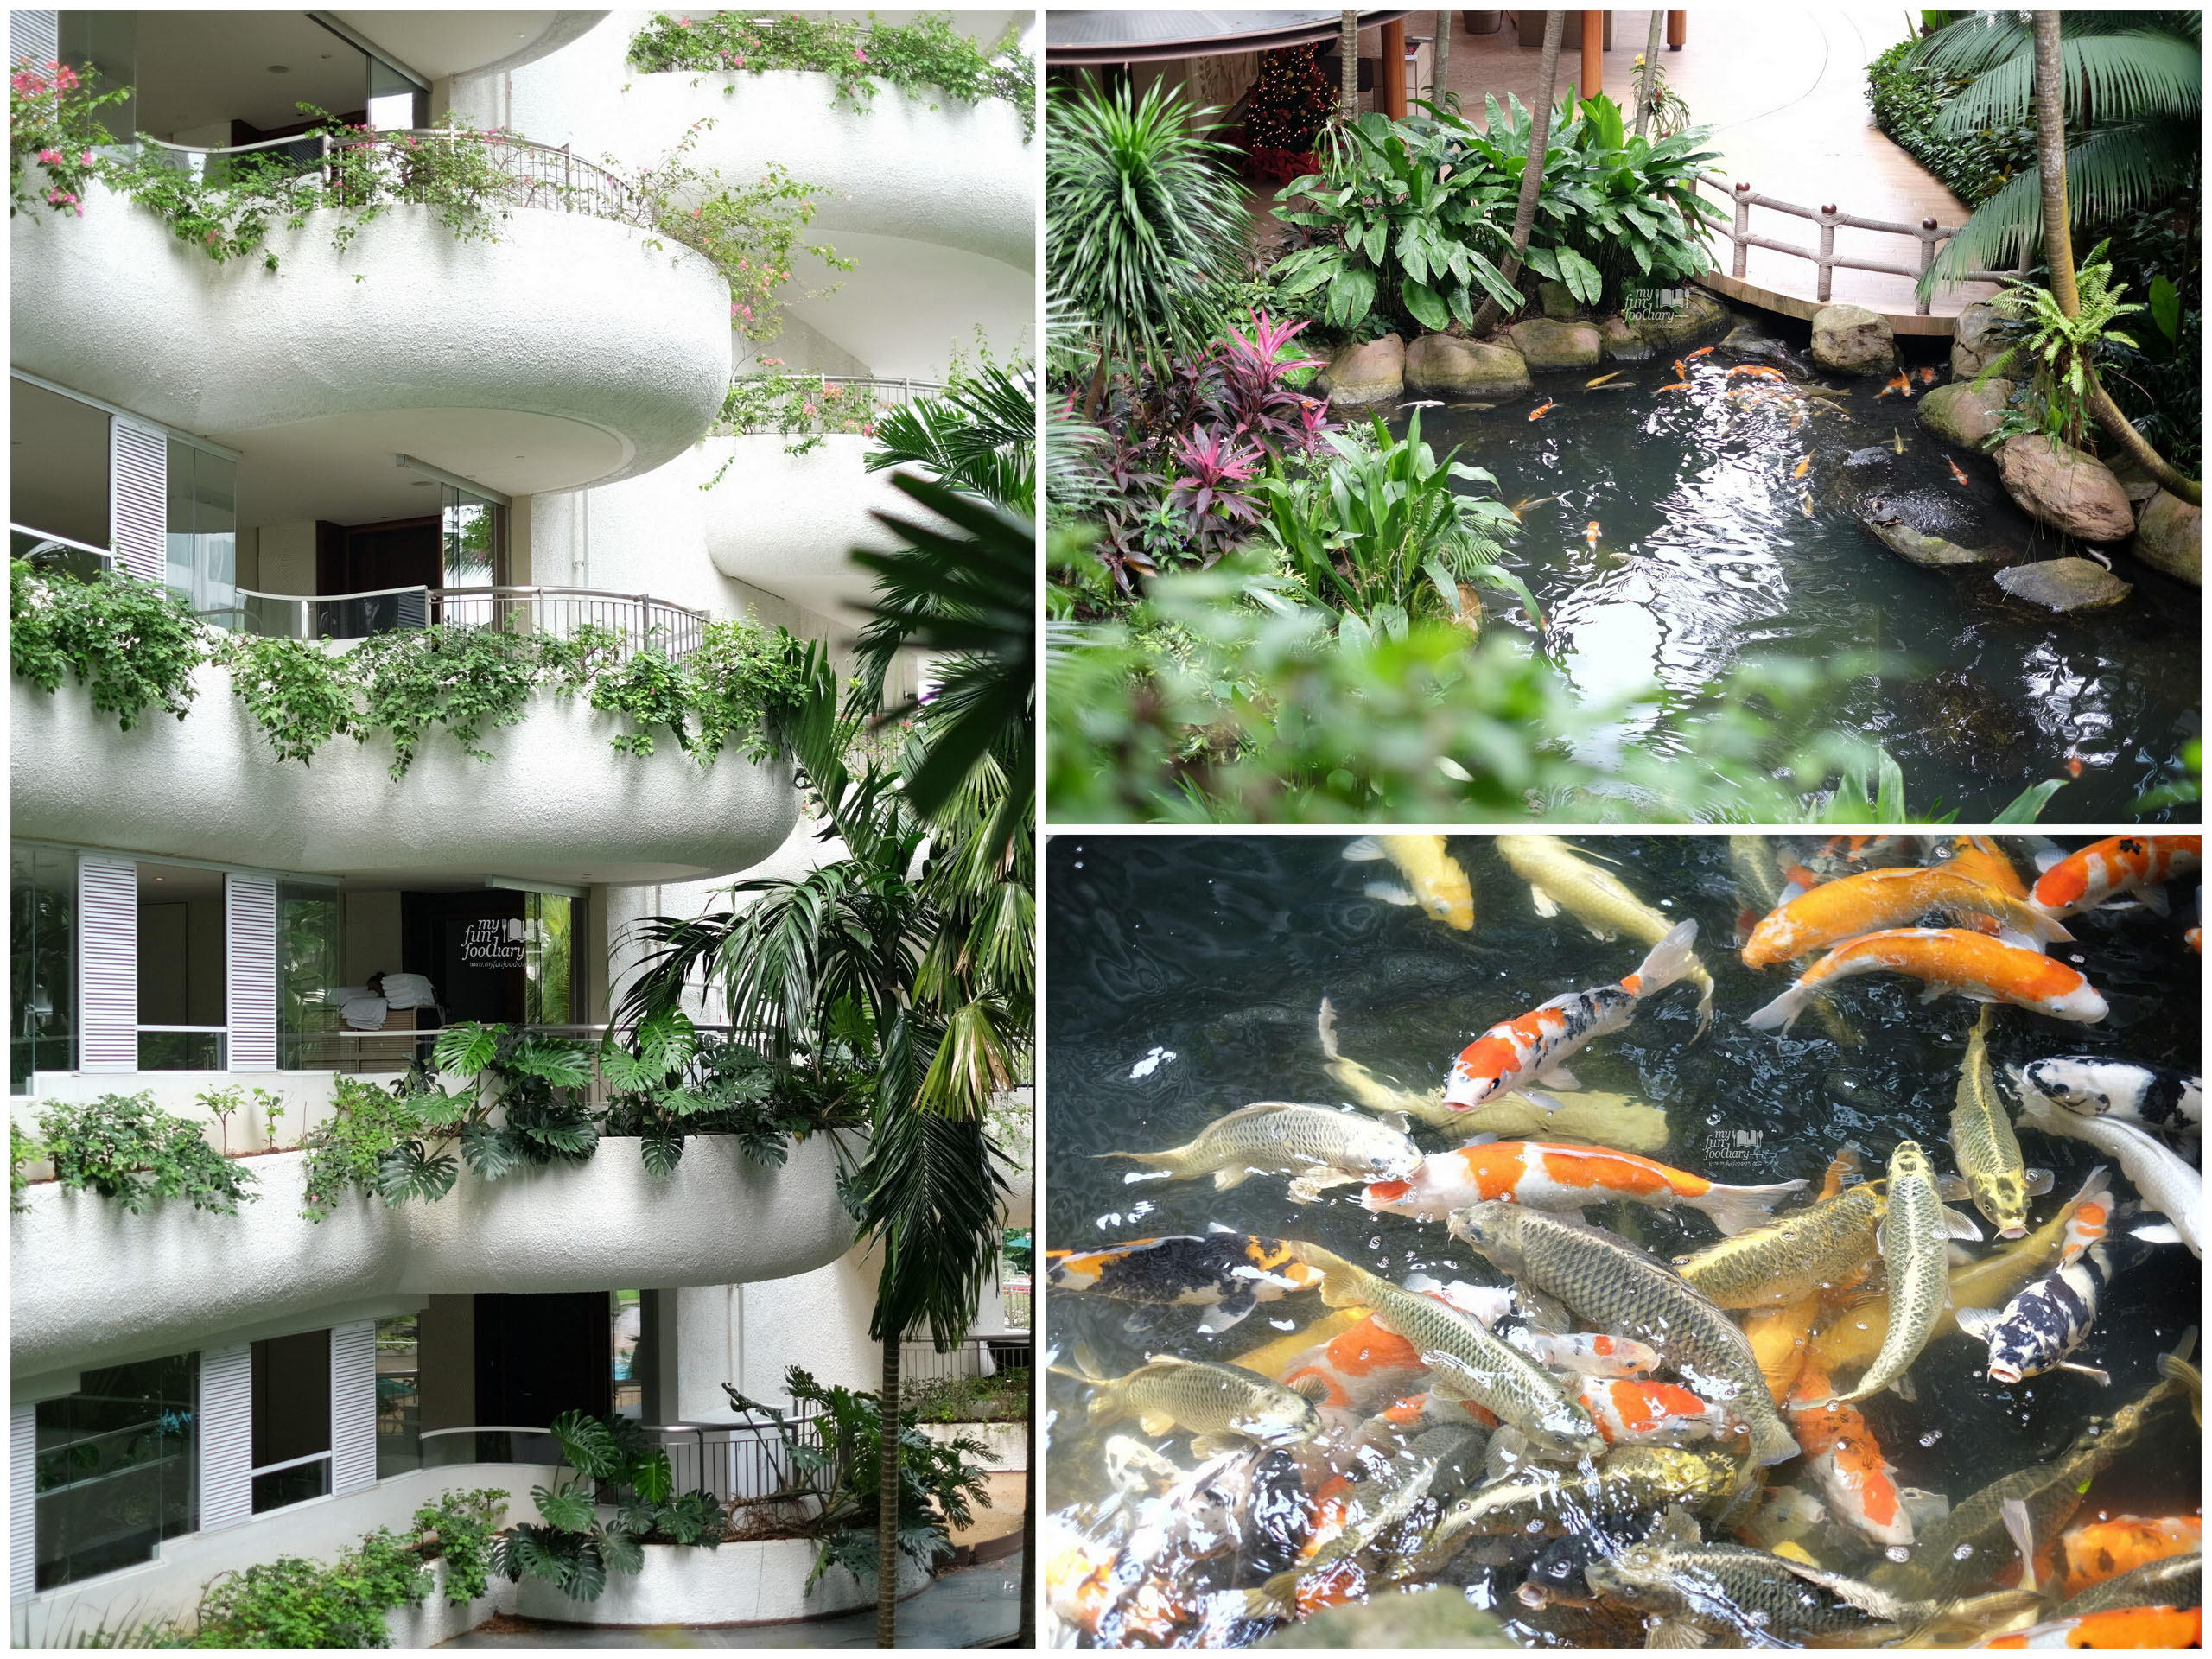 Garden Wing Area at Shangri-La Singapore by Myfunfoodiary